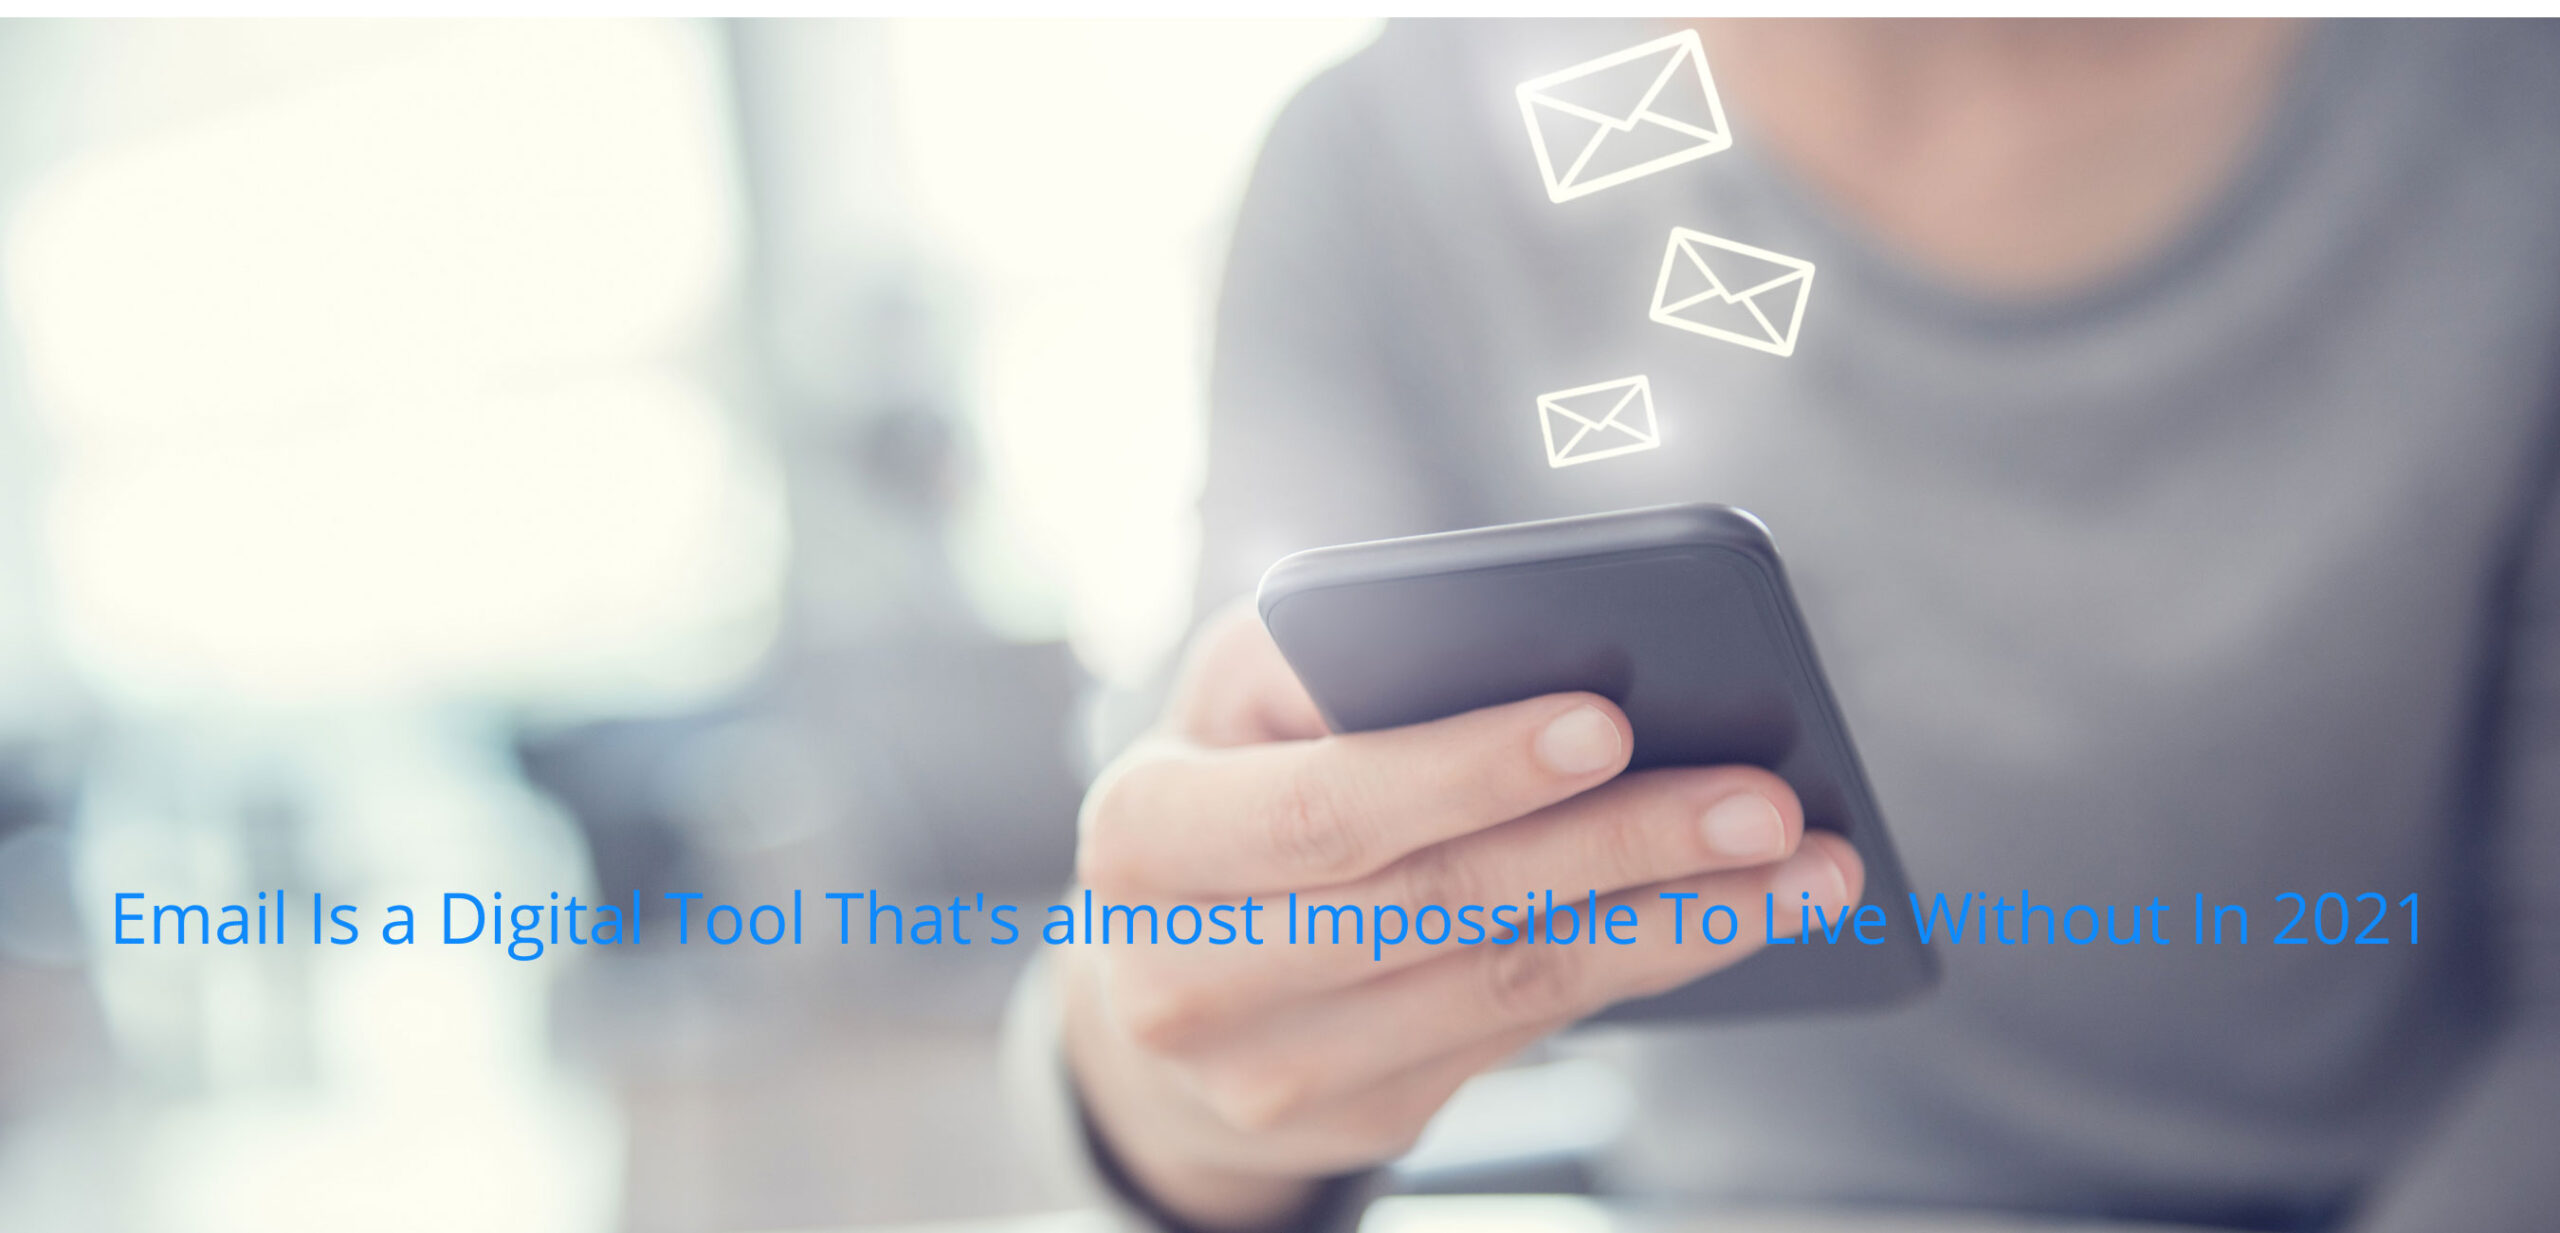 Email-Is-a-Digital-Tool-Thats-Almost-Impossible-To-Live-Without in 2021,